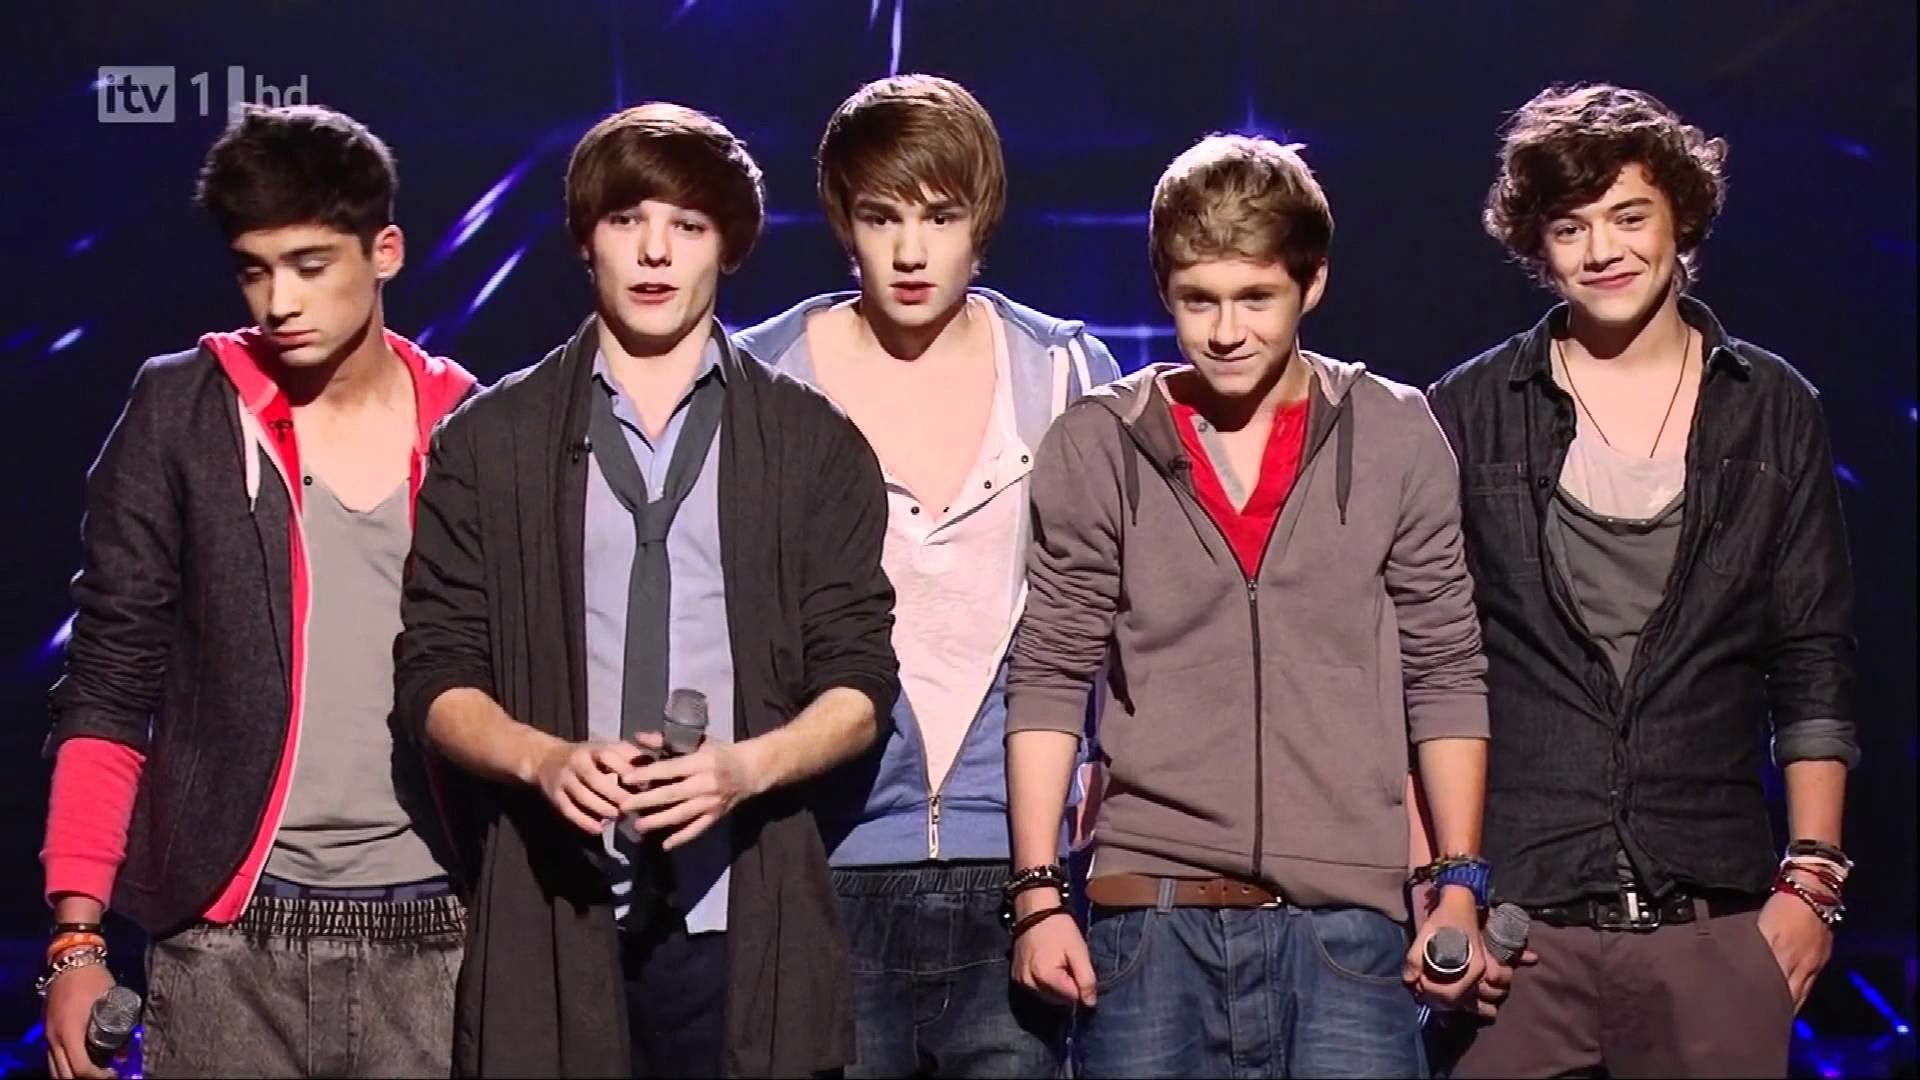 One Direction The X Factor 2010 Live Show 3 Nobody - One Direction - HD Wallpaper 